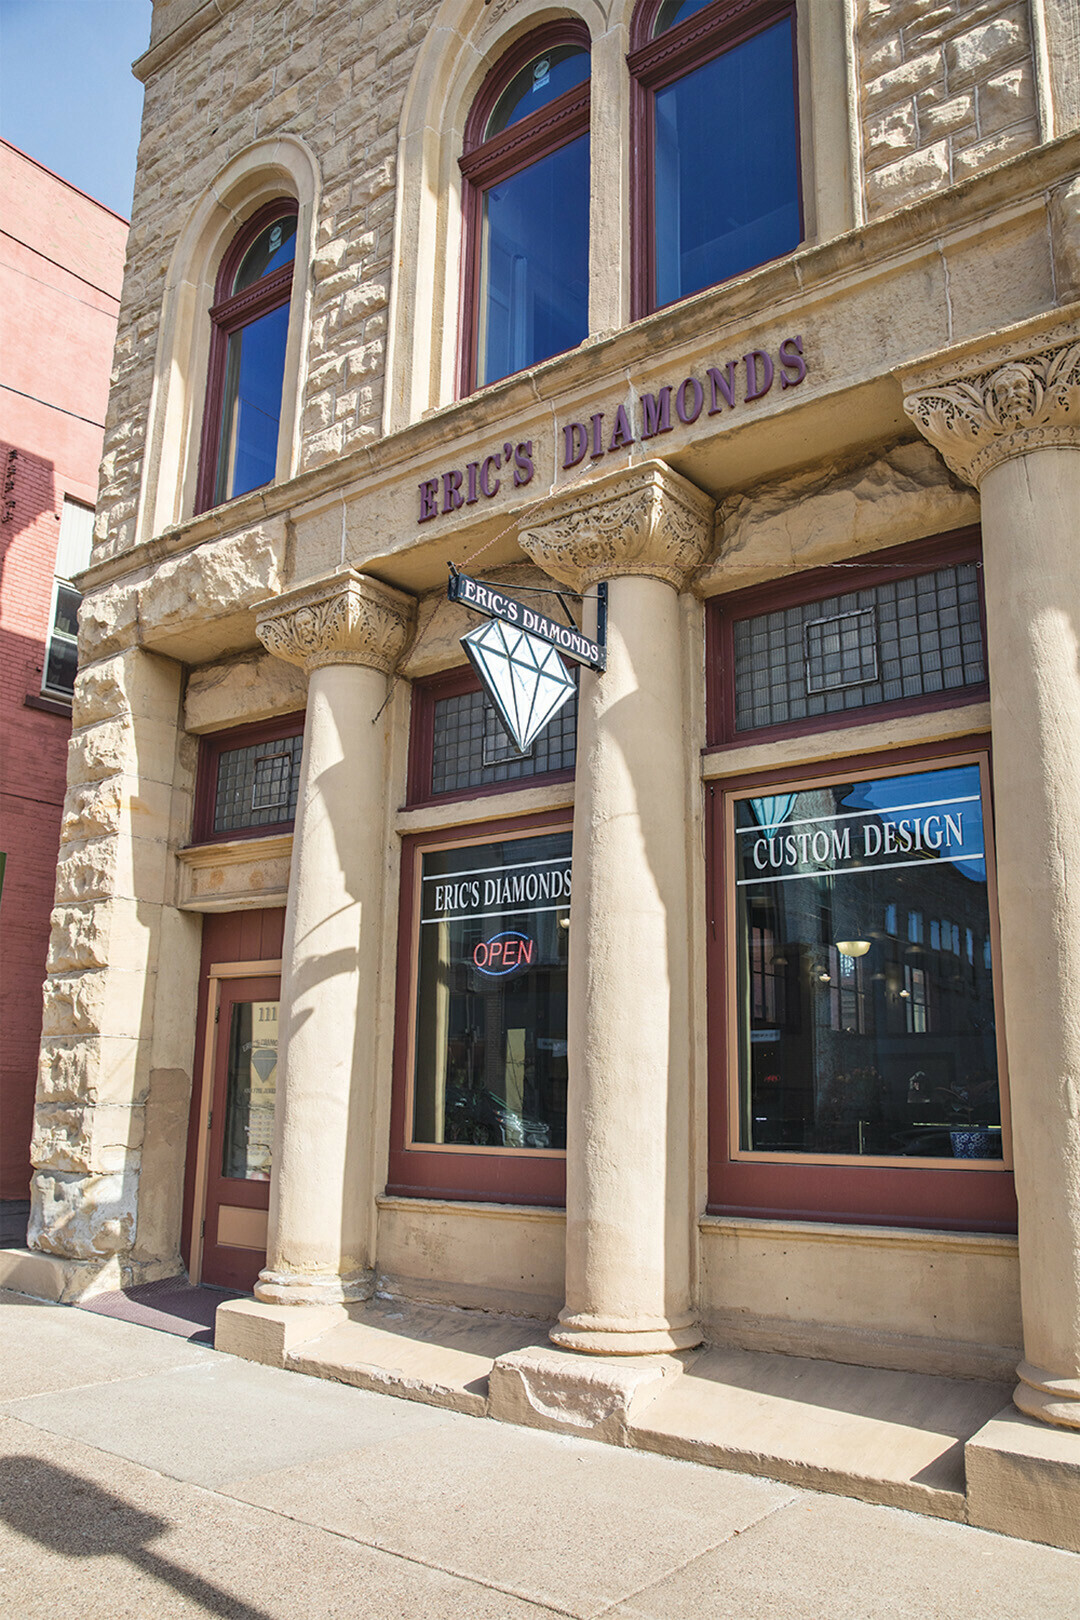 Eric's Diamonds is housed in a historic building at 111 N. Bridge St., Chippewa Falls.